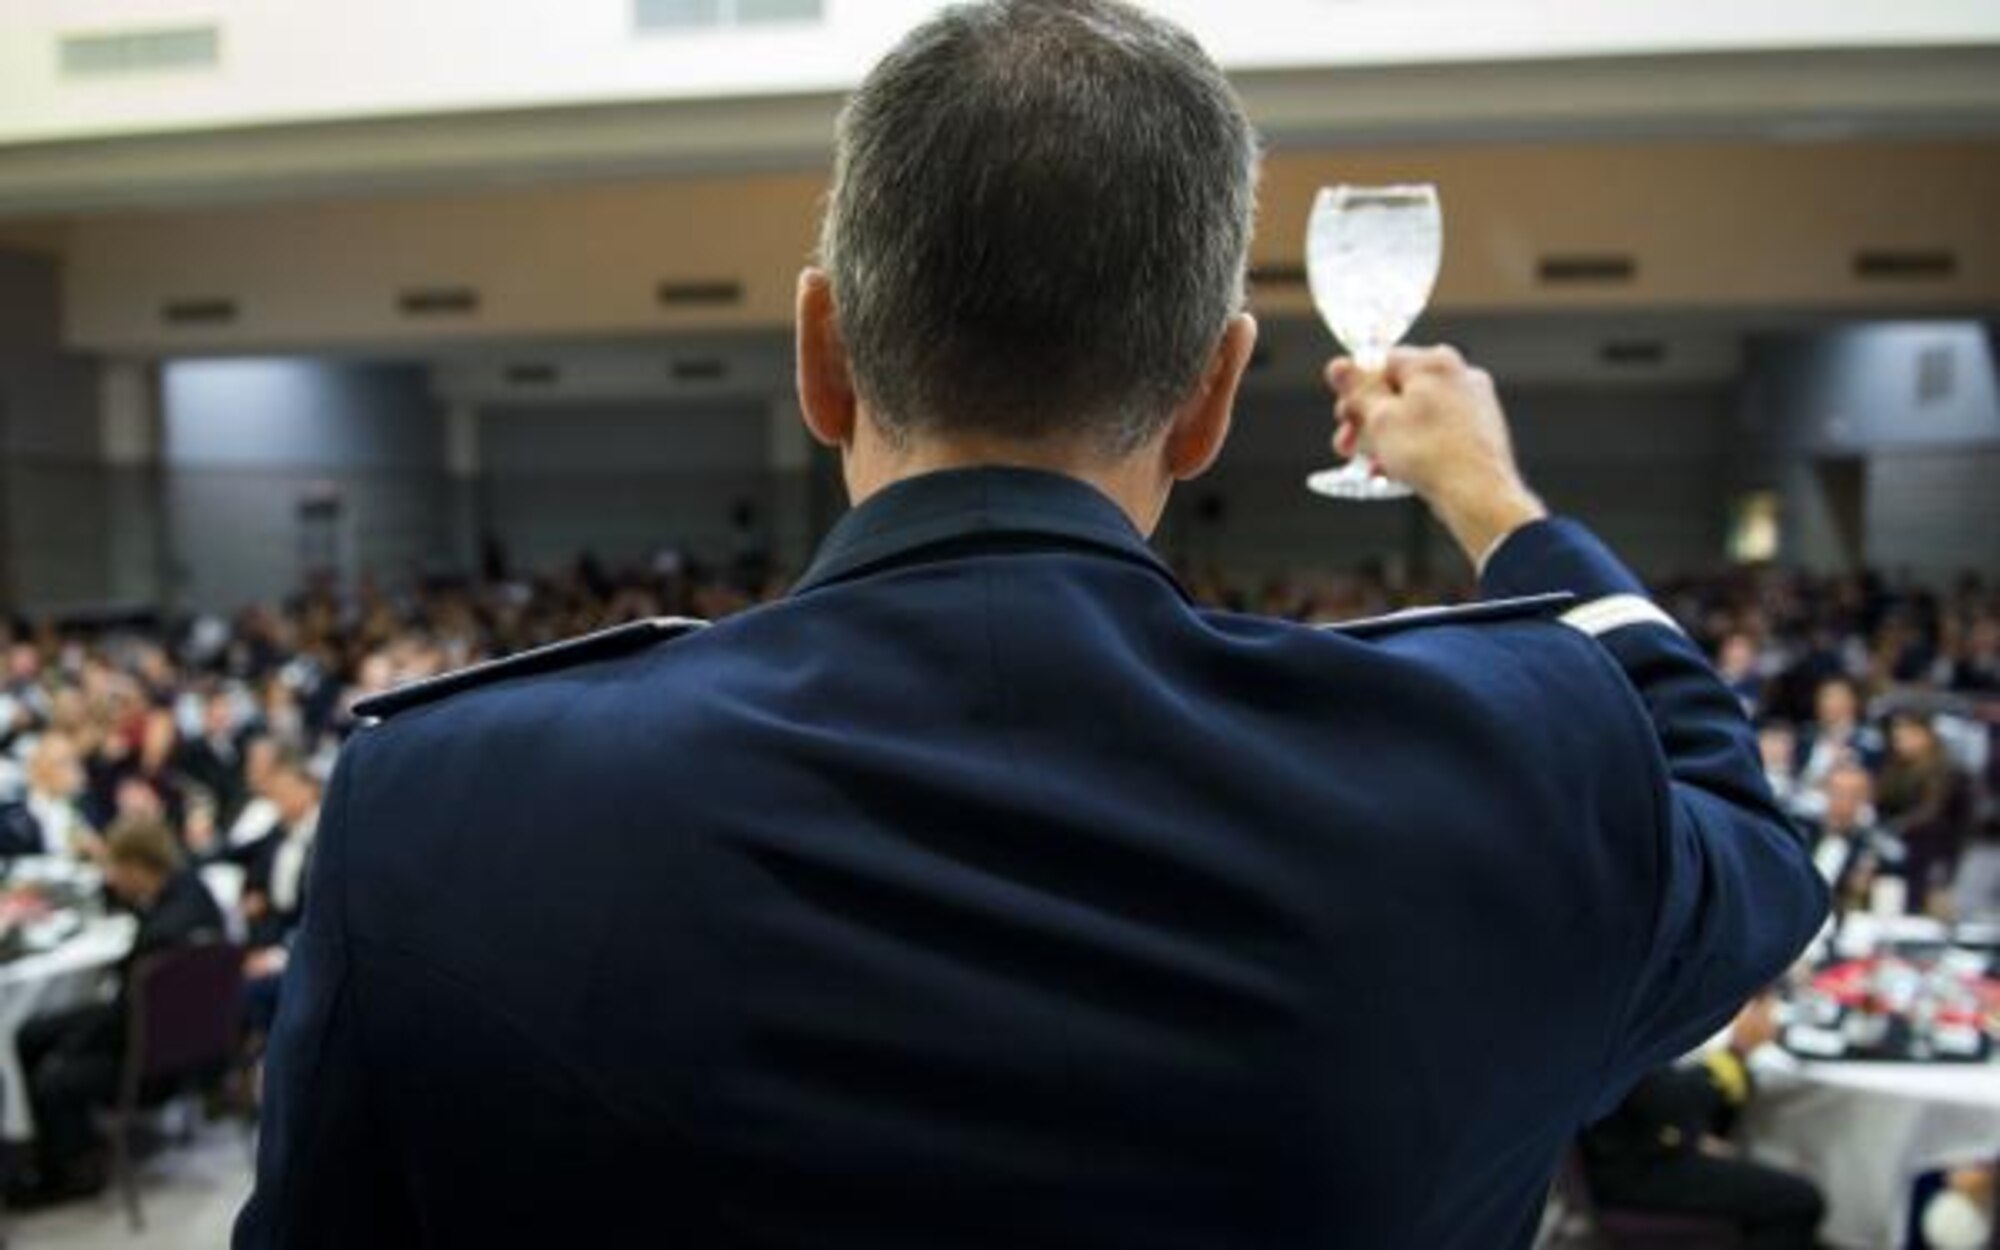 Photo of Airman giving a ceremonial toast